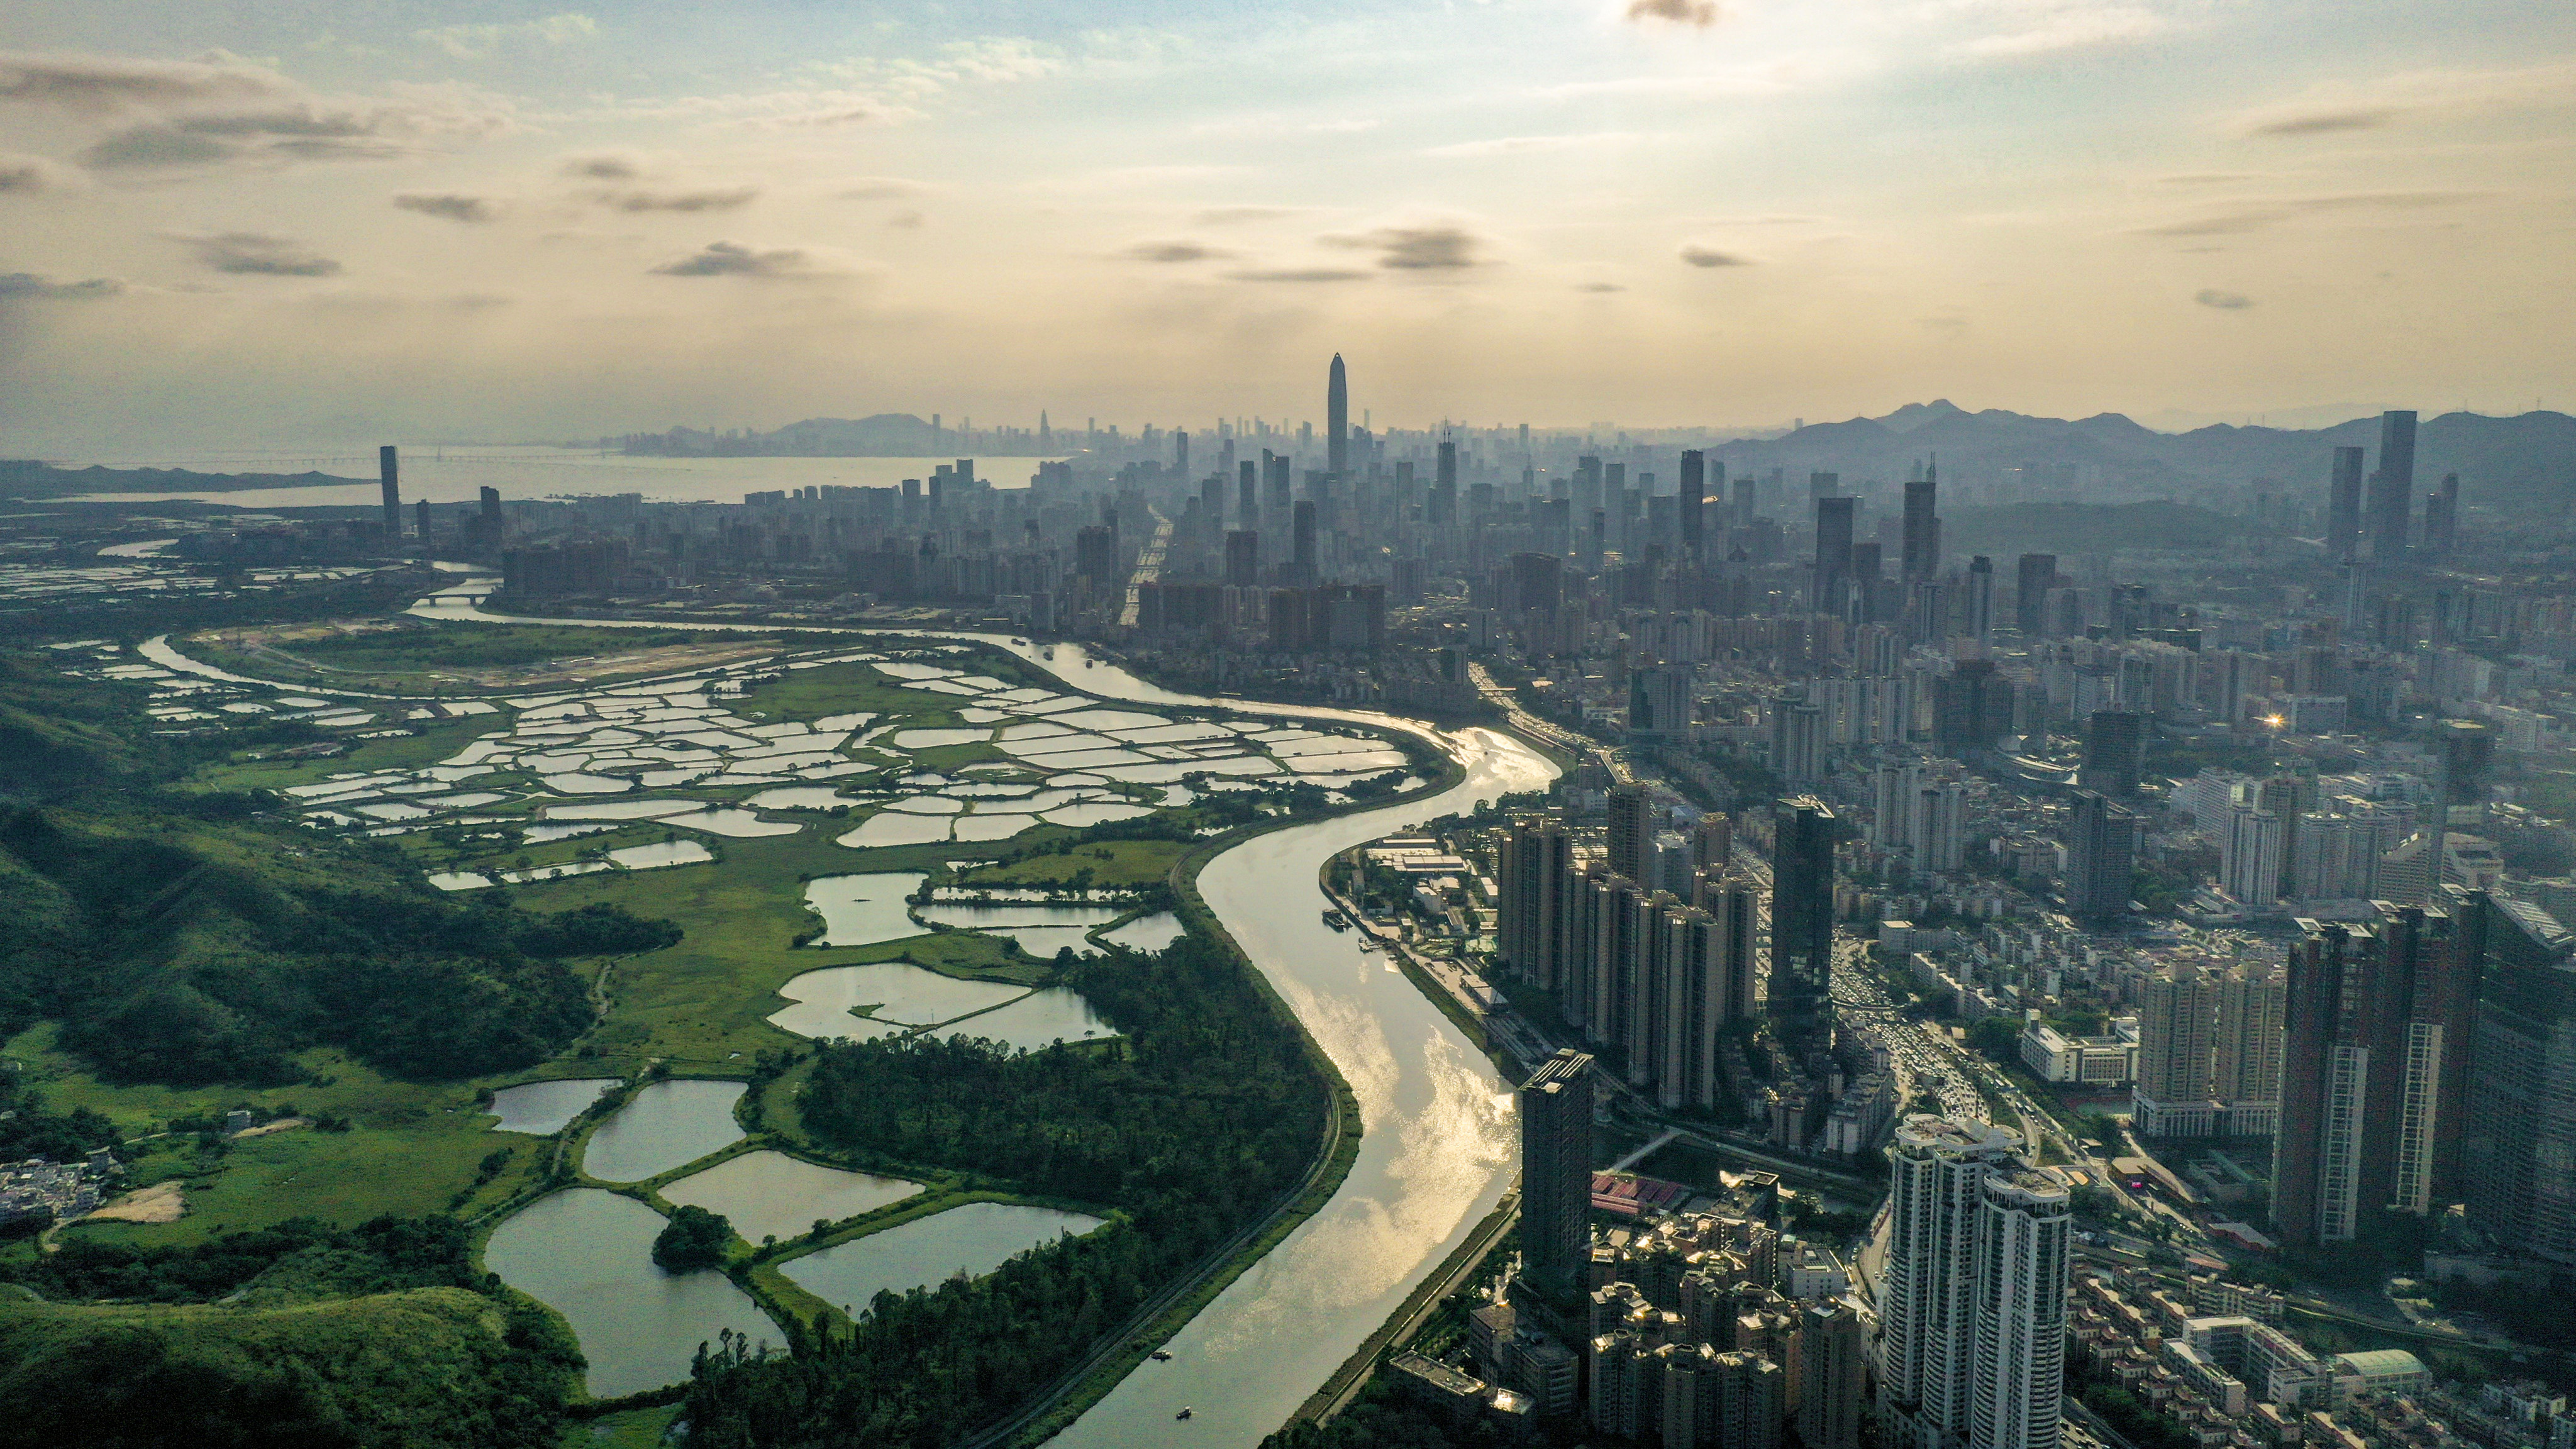 The border separating Shenzhen and Hong Kong. The two cities will play a critical role in the development of the Greater Bay Area. Photo: Martin Chan